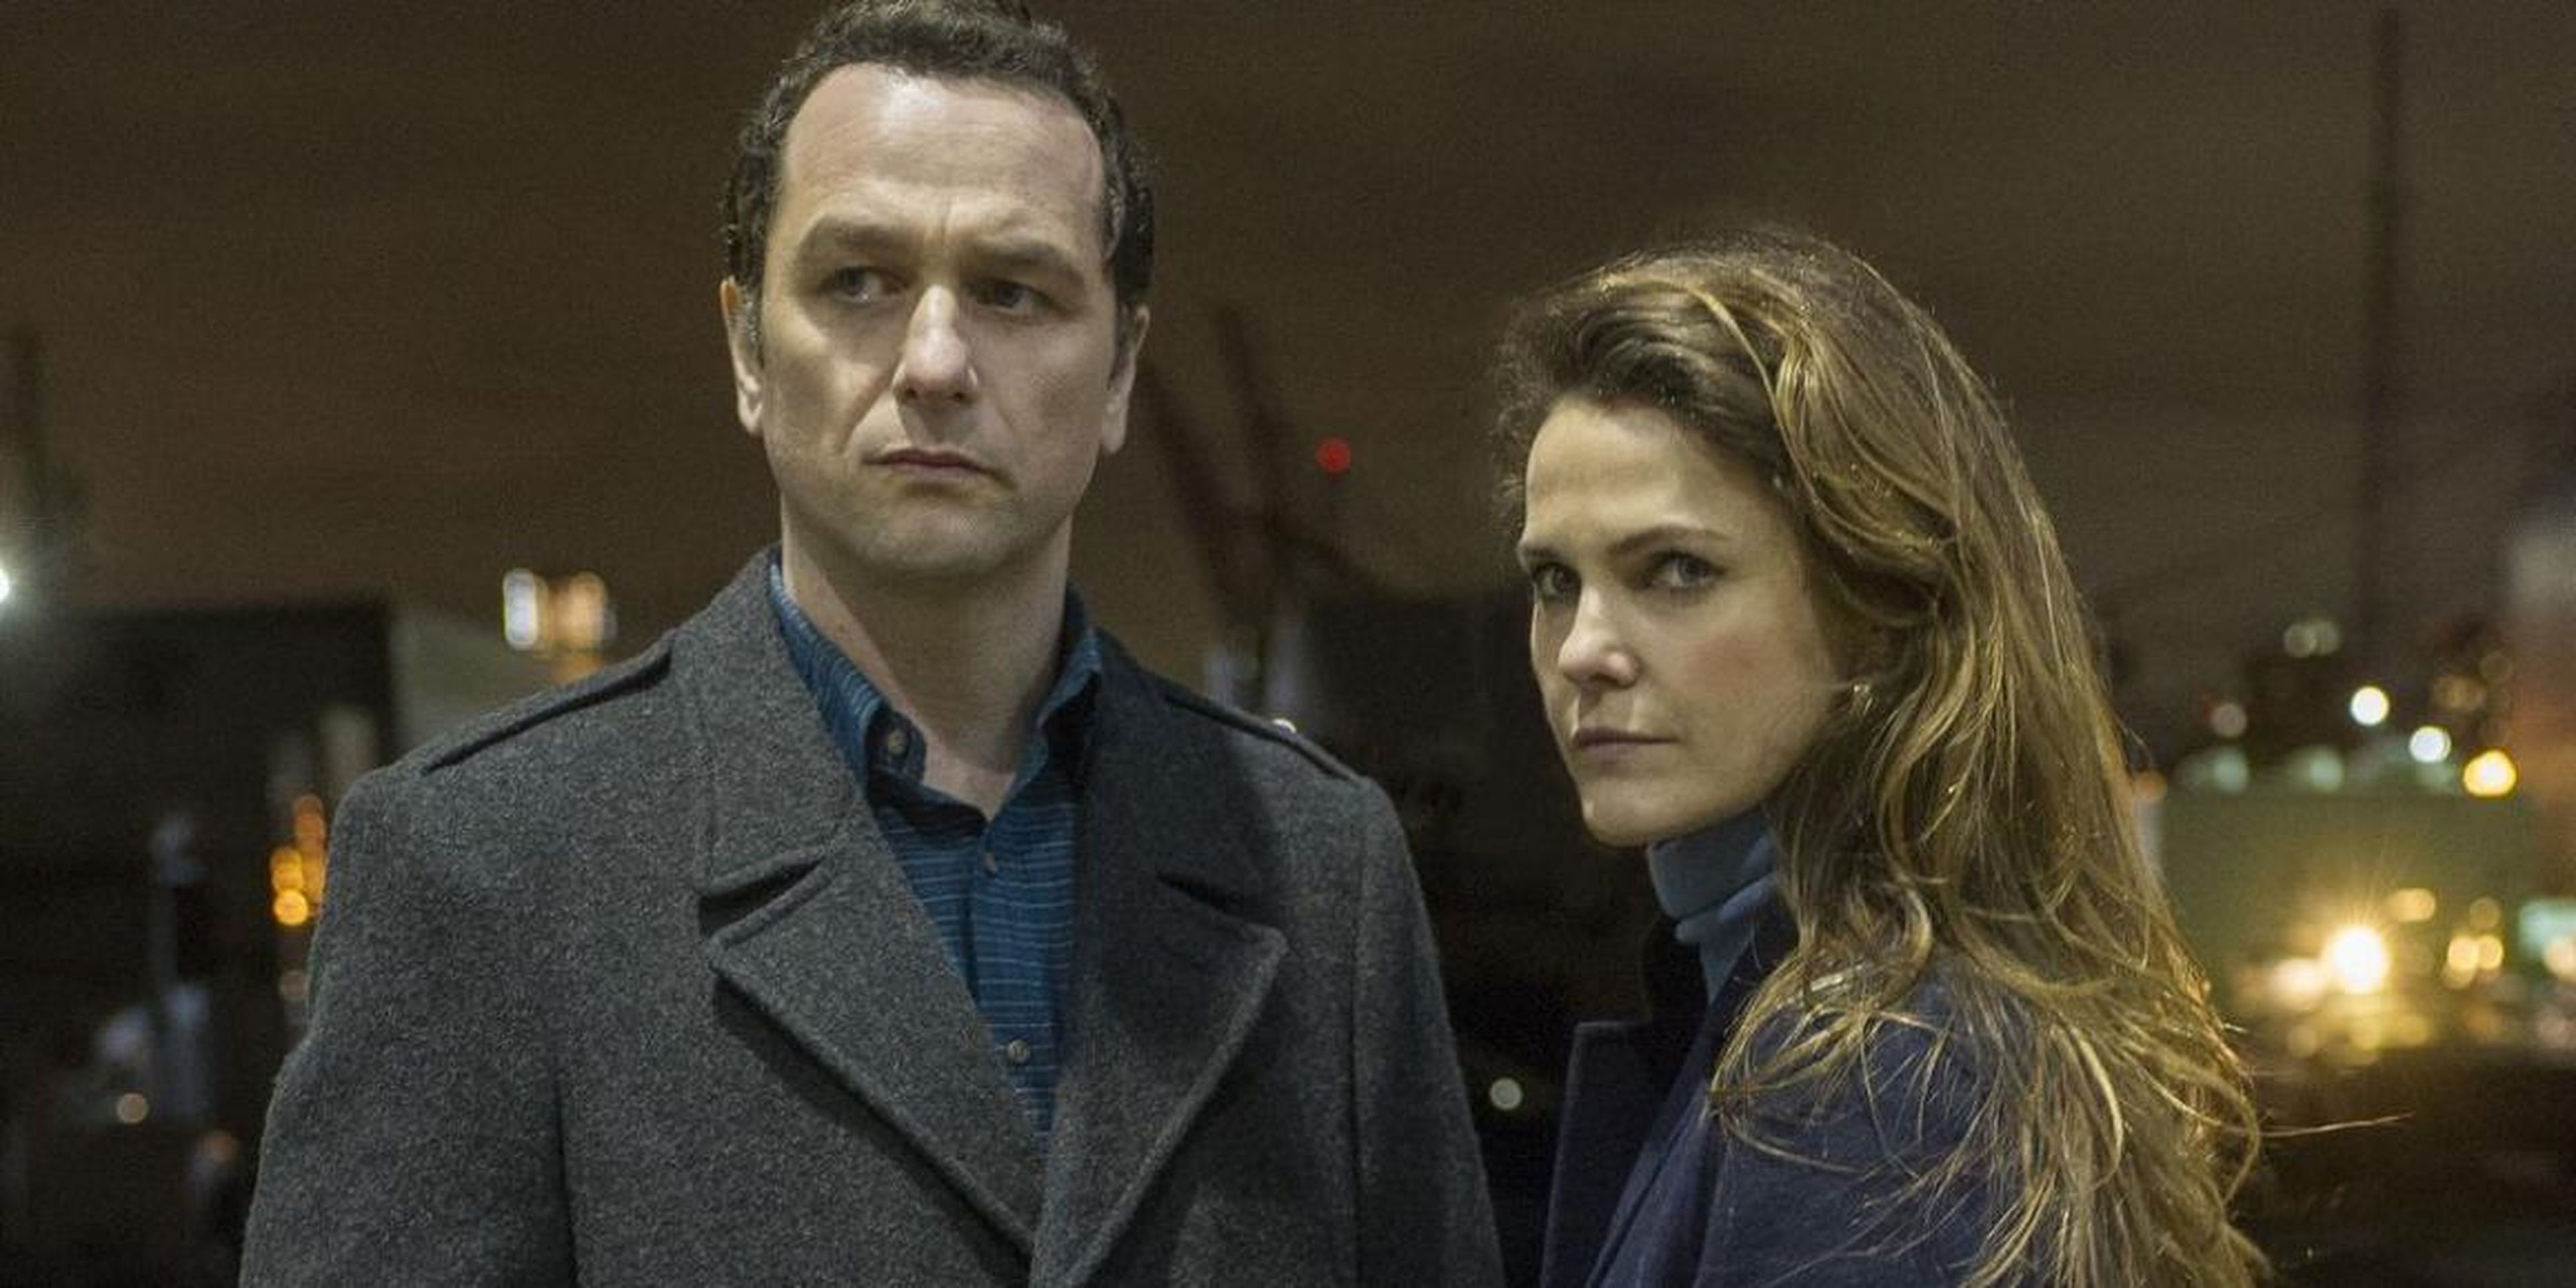 "The Americans" is nominated in three categories.